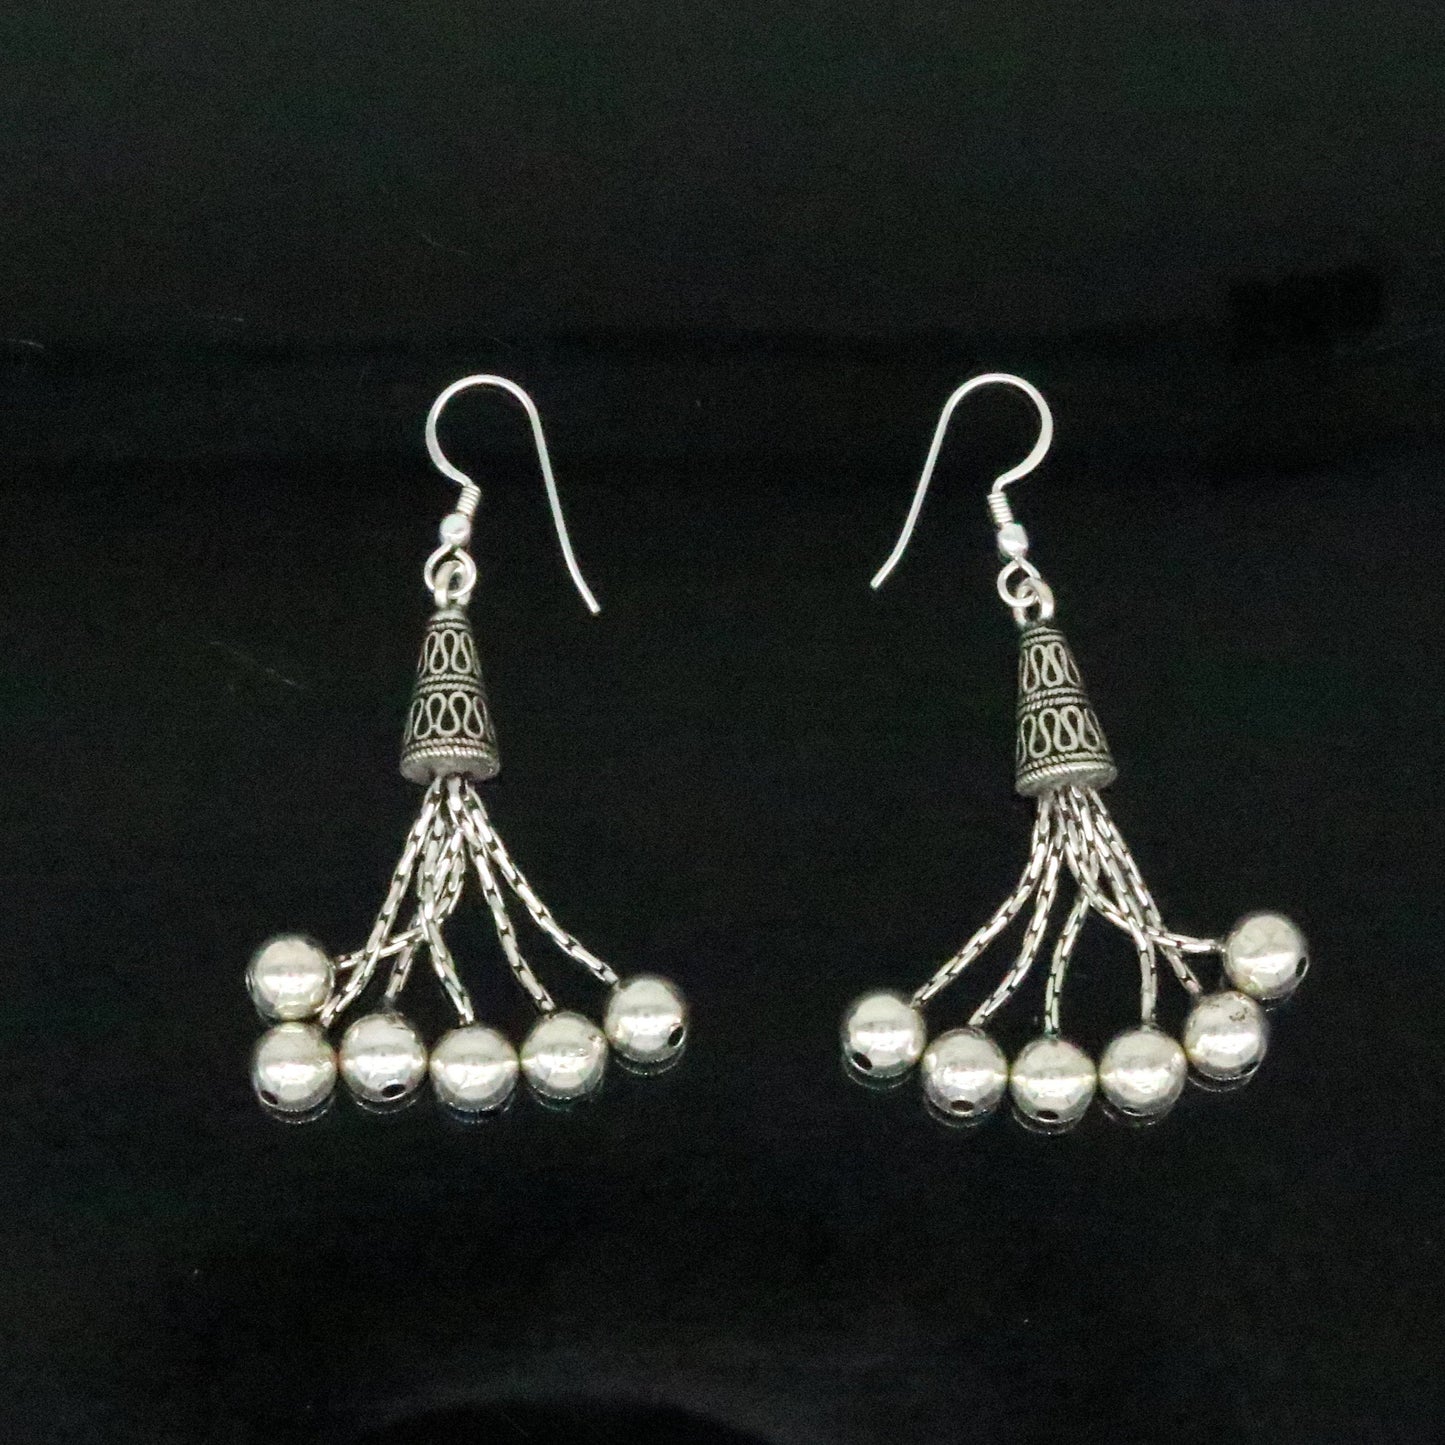 925 sterling silver handmade Fabulous customized design hoops earring with gorgeous hanging charm earring bridesmaid gifting jewelry ear1 - TRIBAL ORNAMENTS